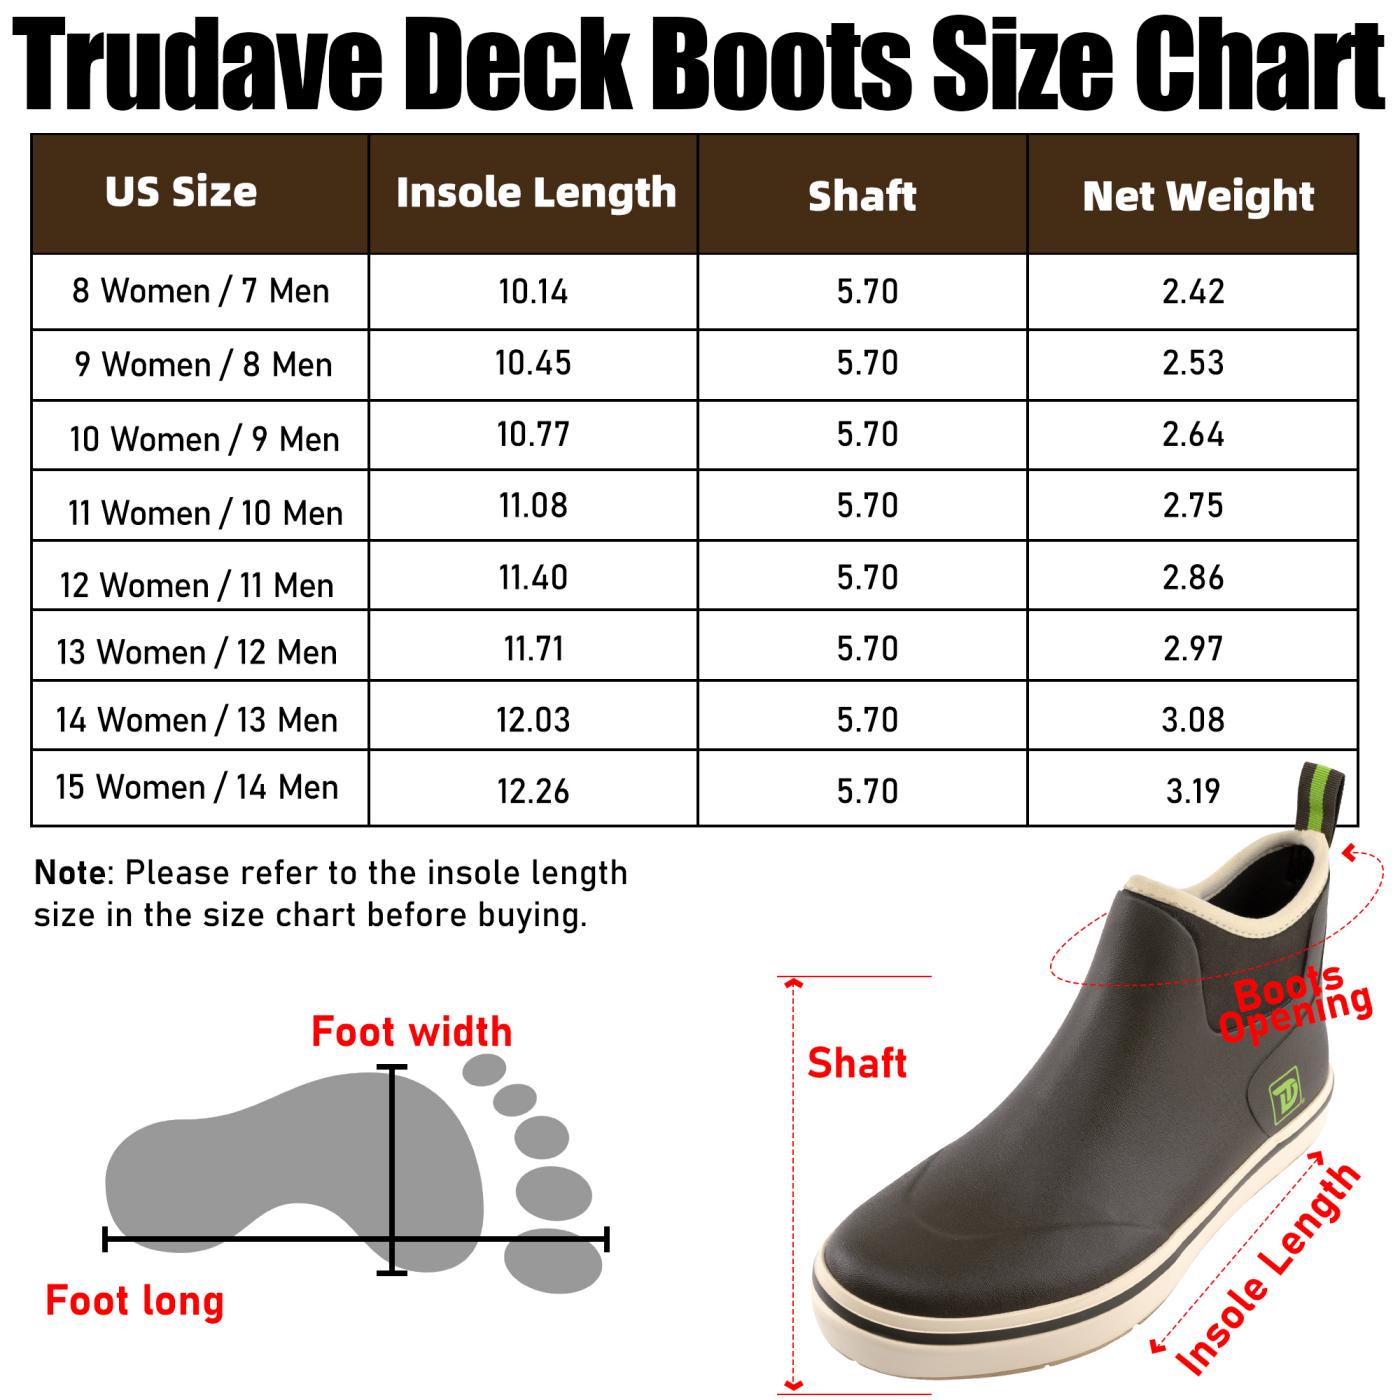 Trudave 5.7 INCH Men's Fishing Deck Boots-Brown